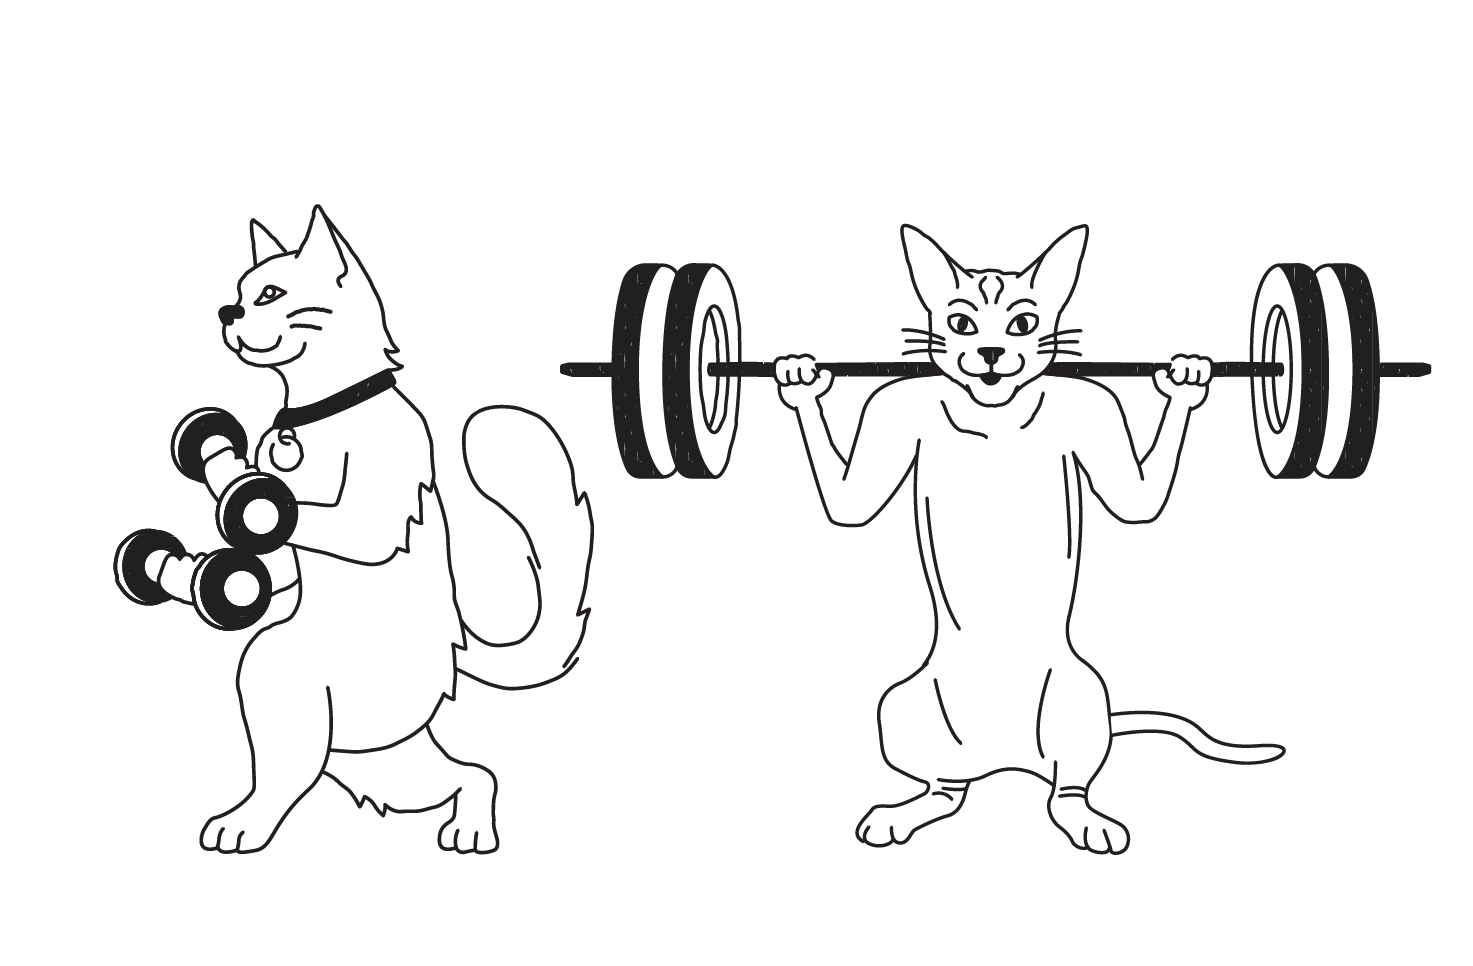 Weightlifting dogs